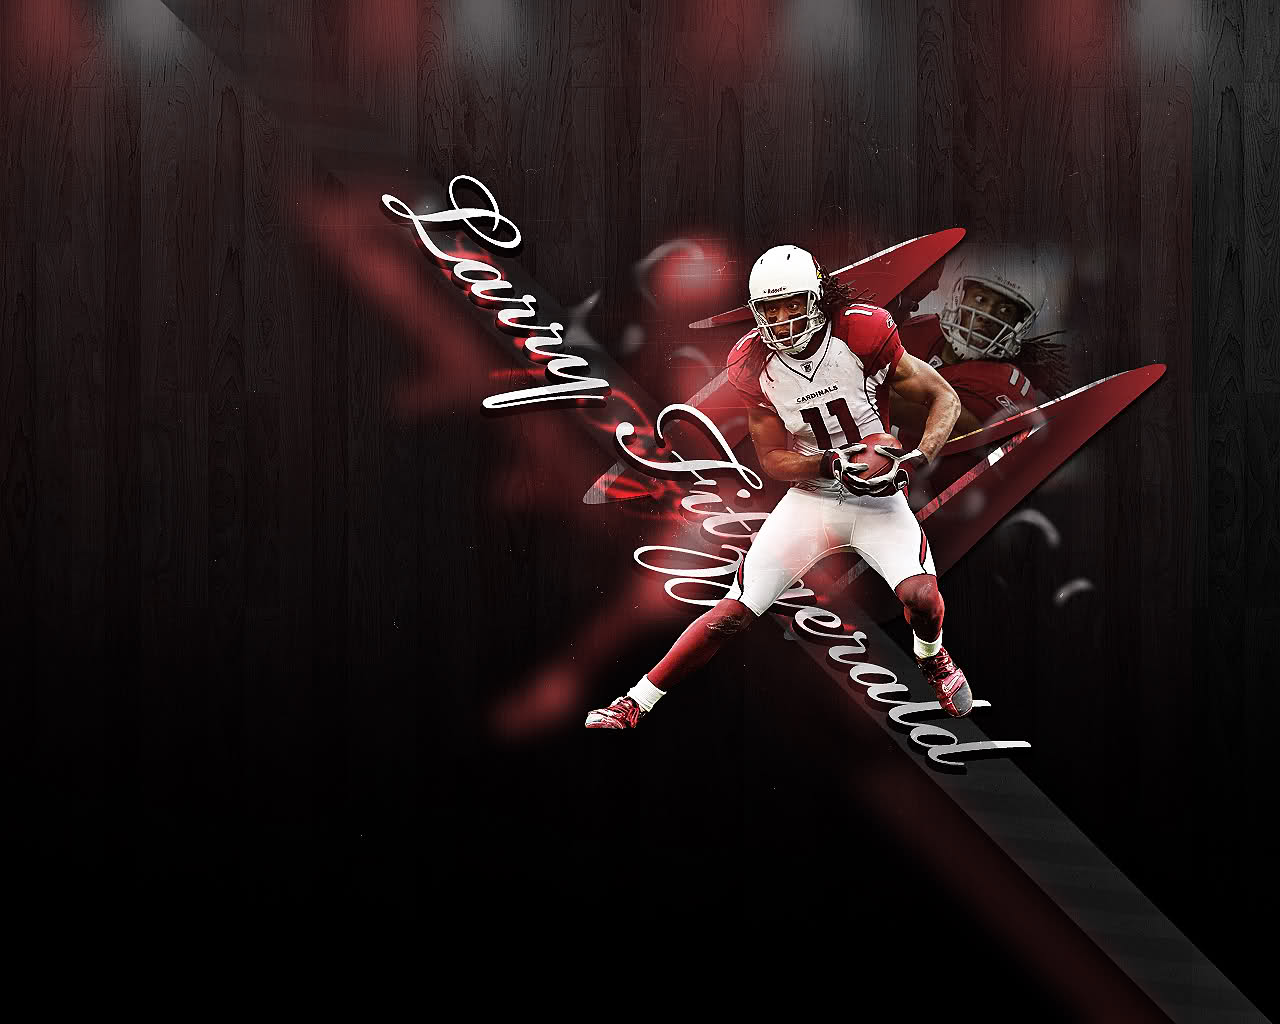 jumping larry fitzgerald image